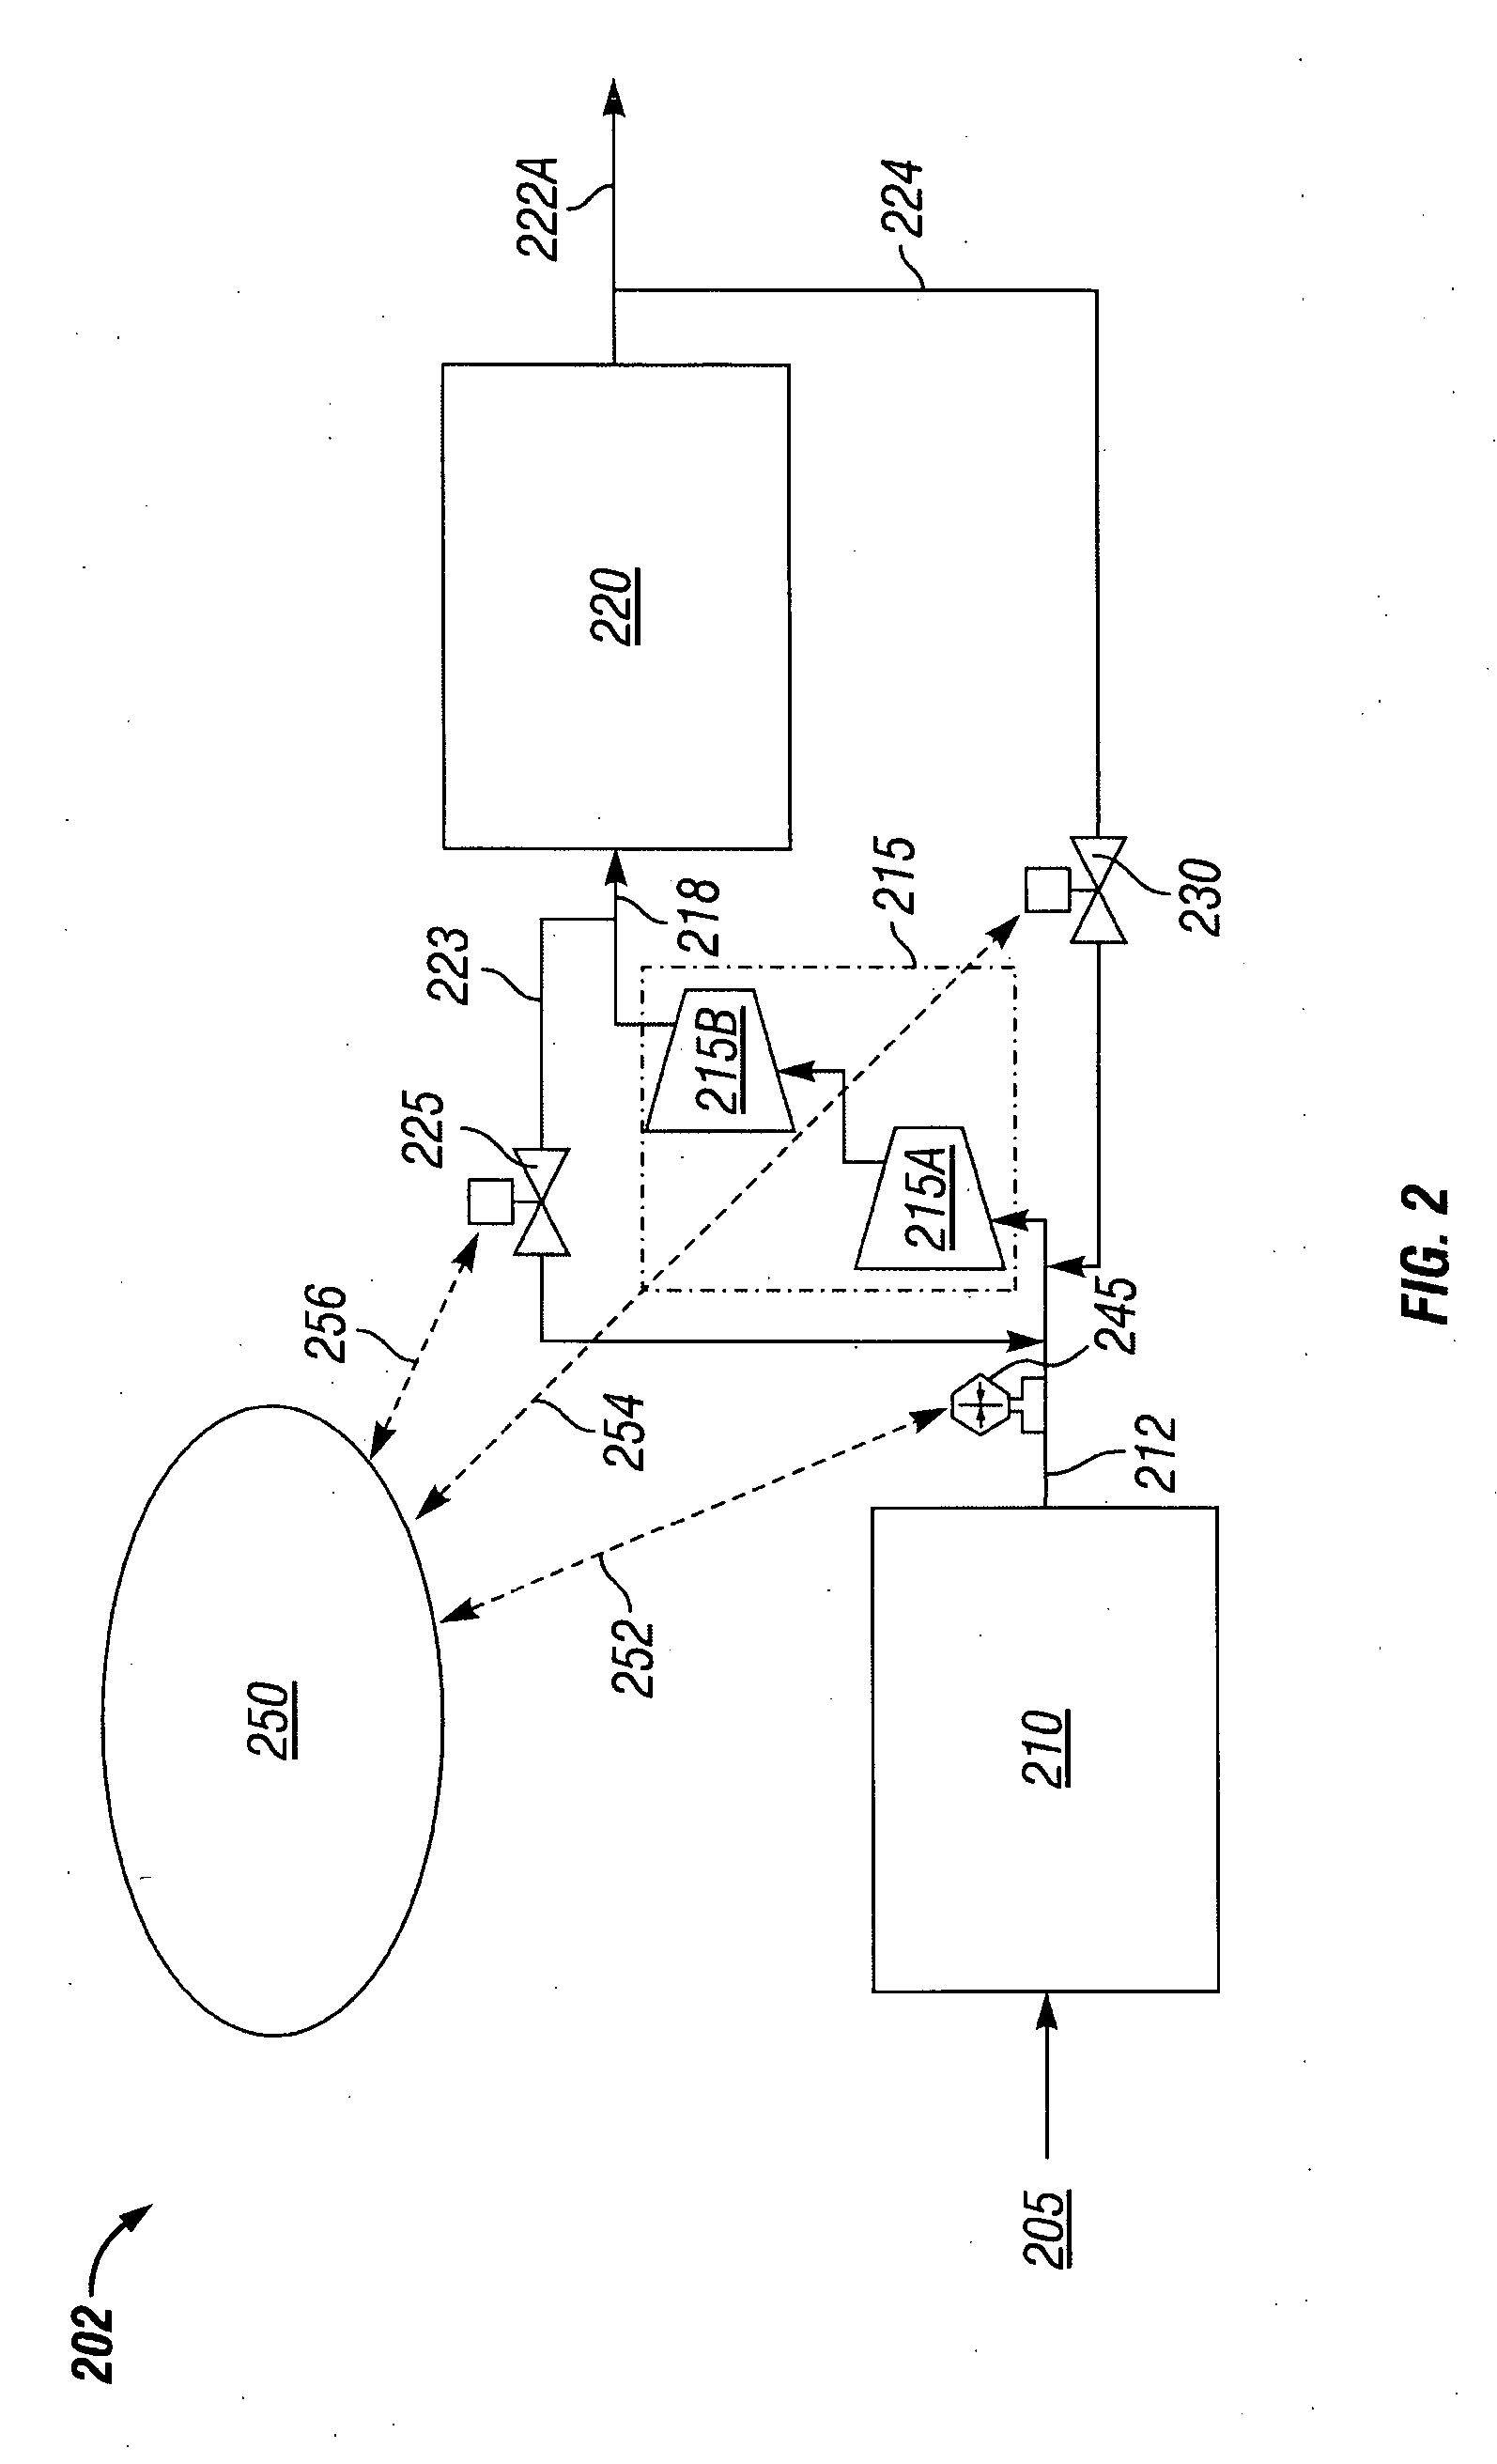 Apparatus and method for producing hydrogen